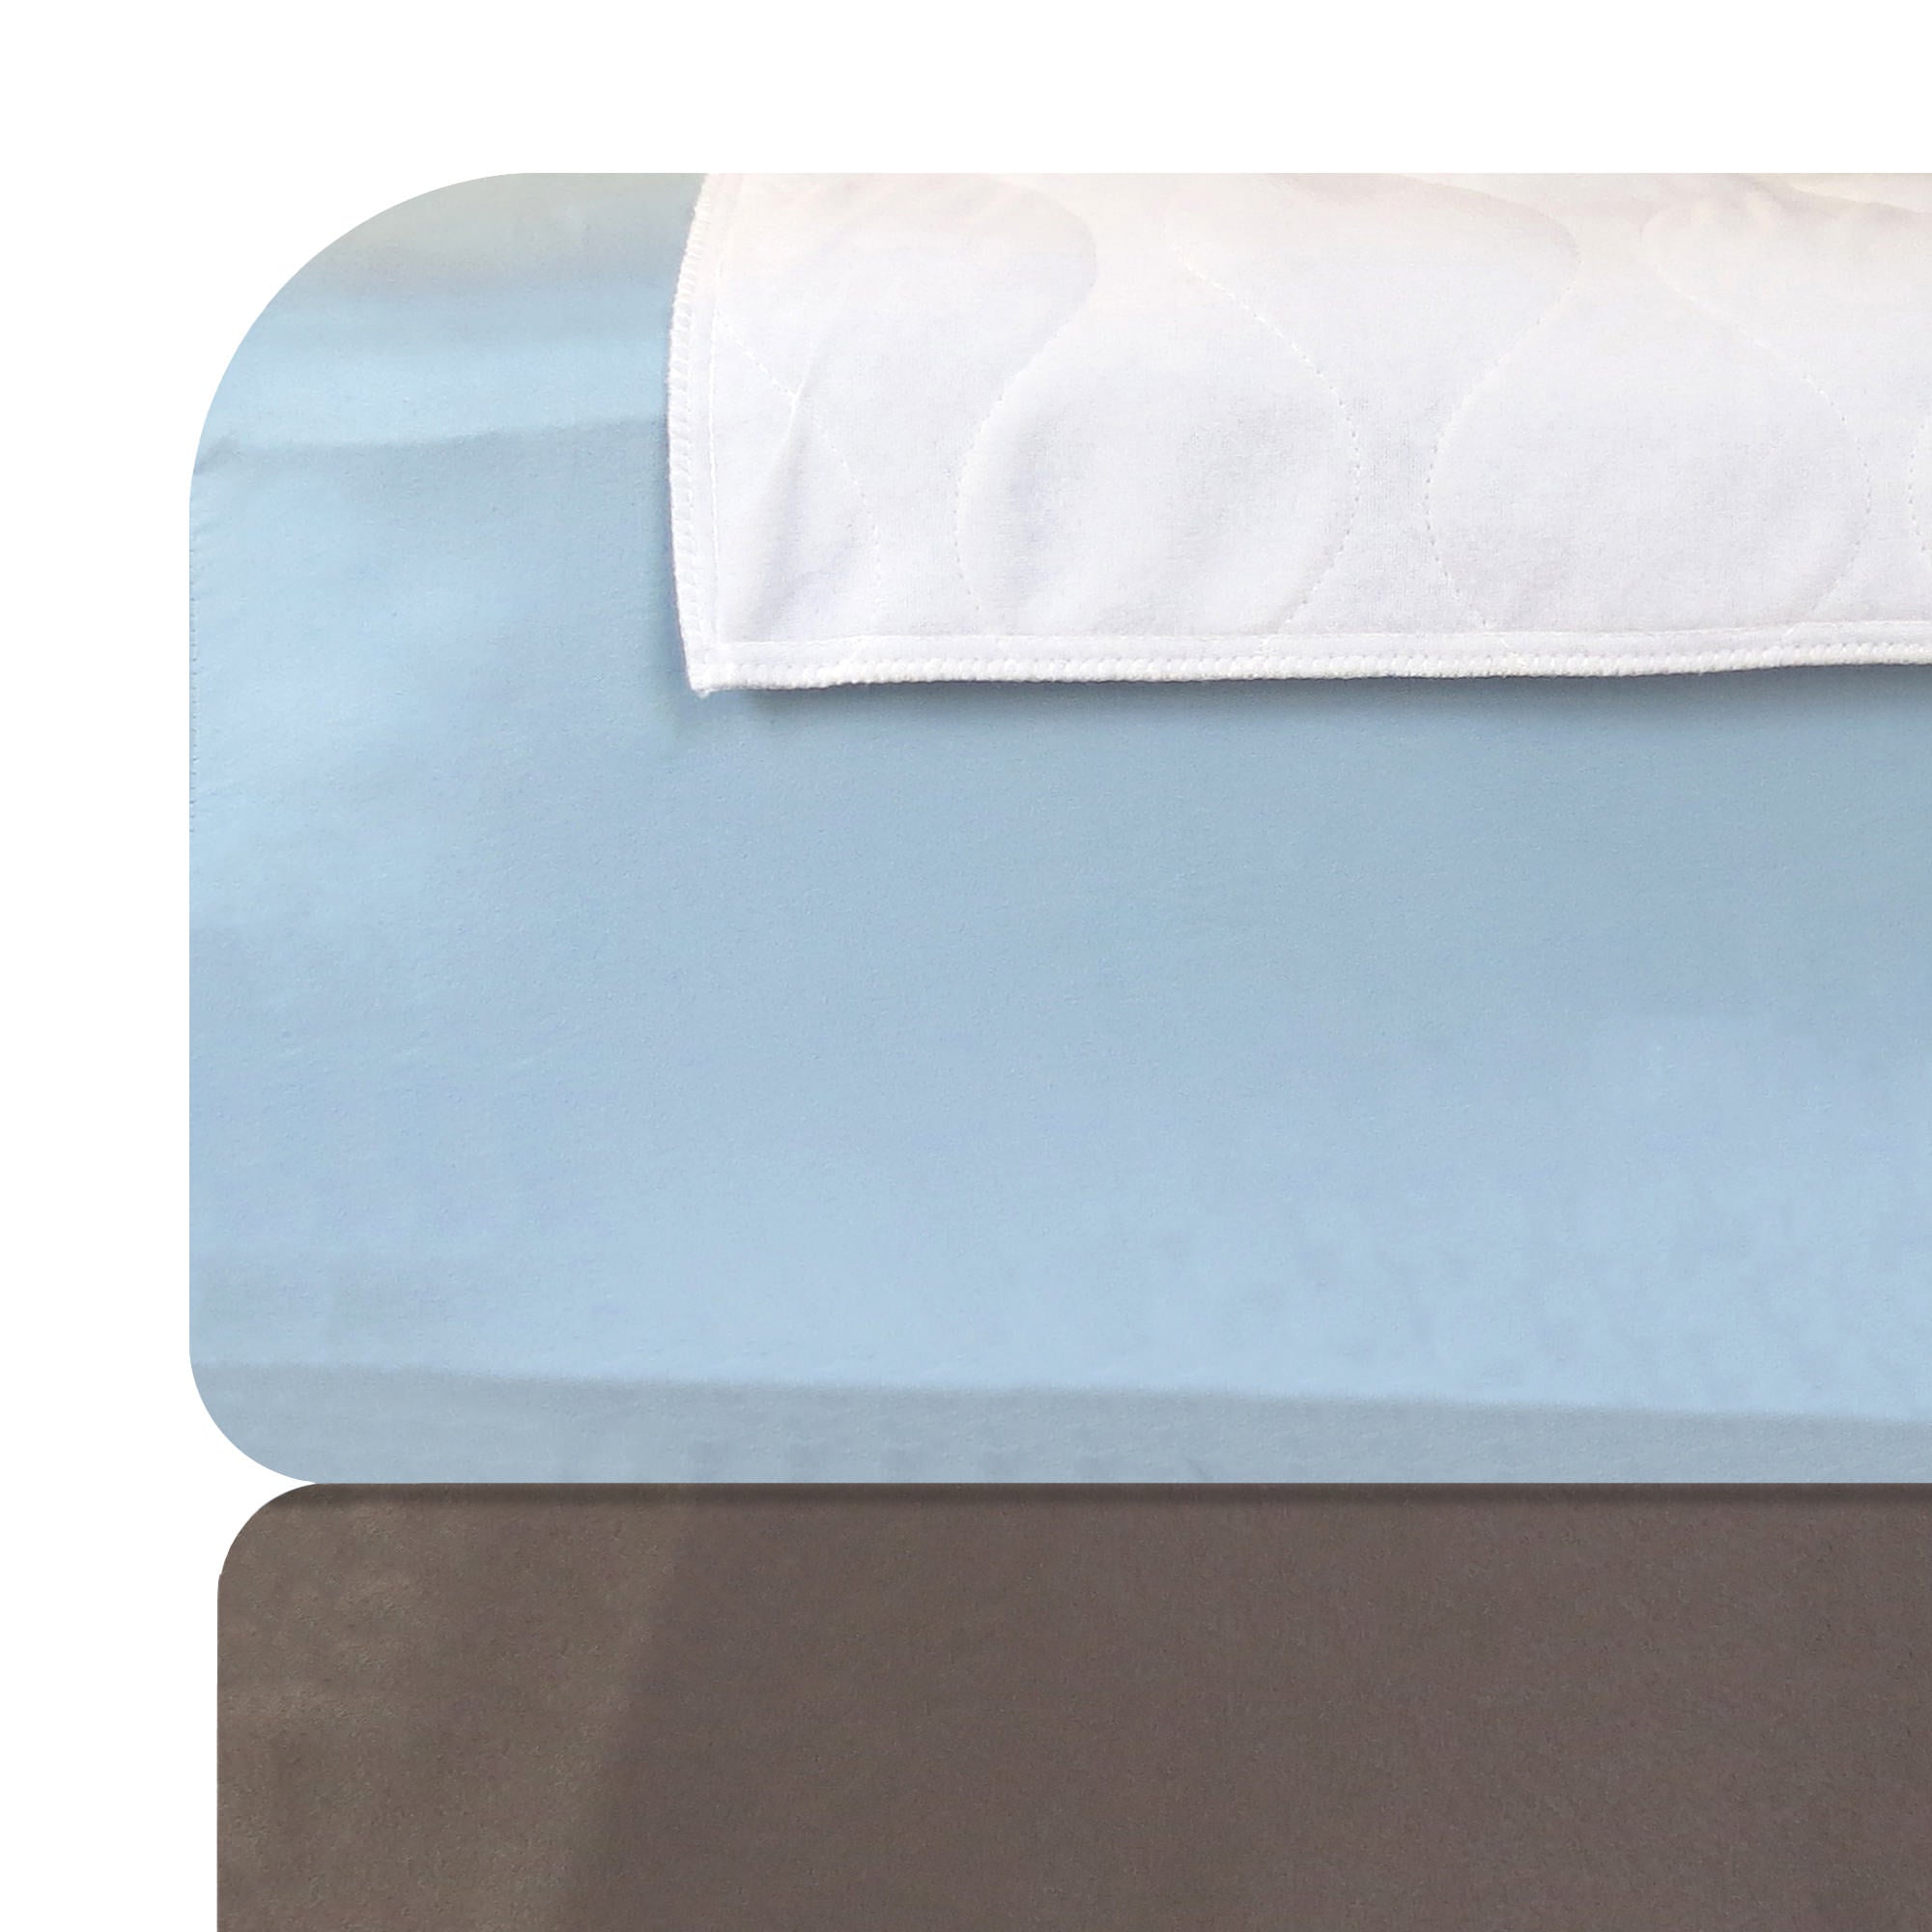 Reusable Bed Wetting Pads for Incontinence - Waterproof Underpad